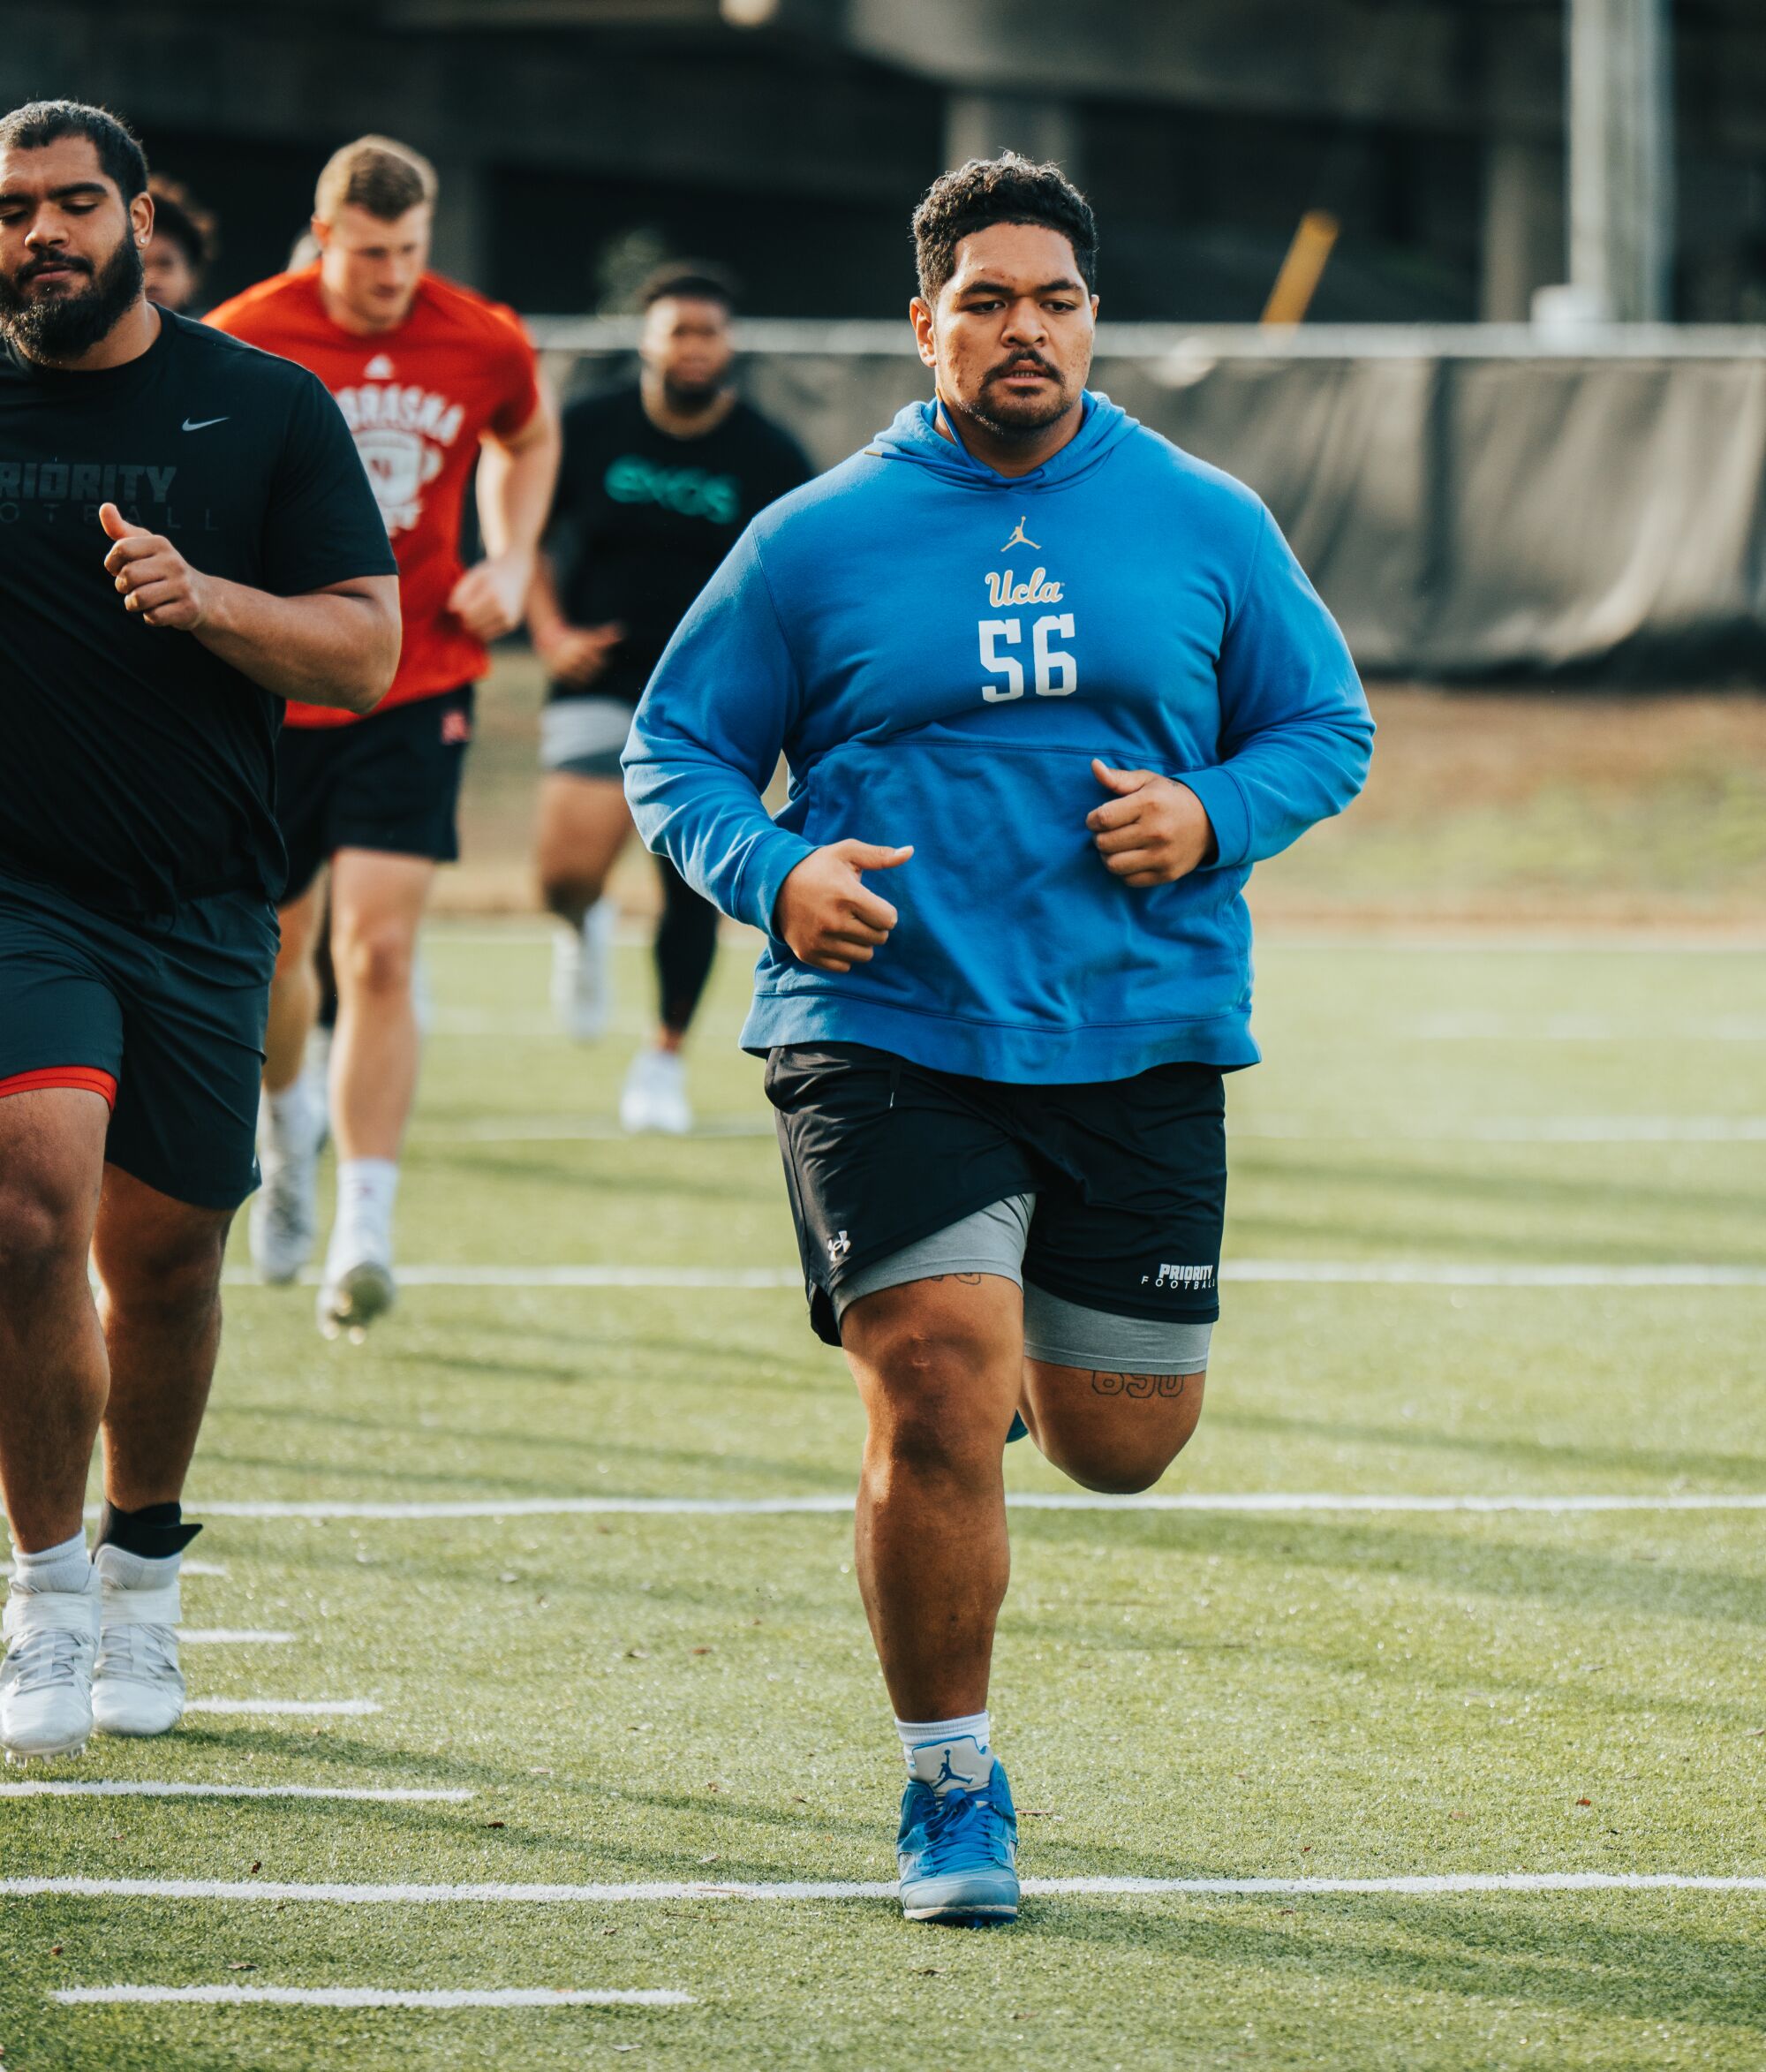 Former UCLA lineman Atonio Mafi runs during a pre-NFL draft workout in Florida.